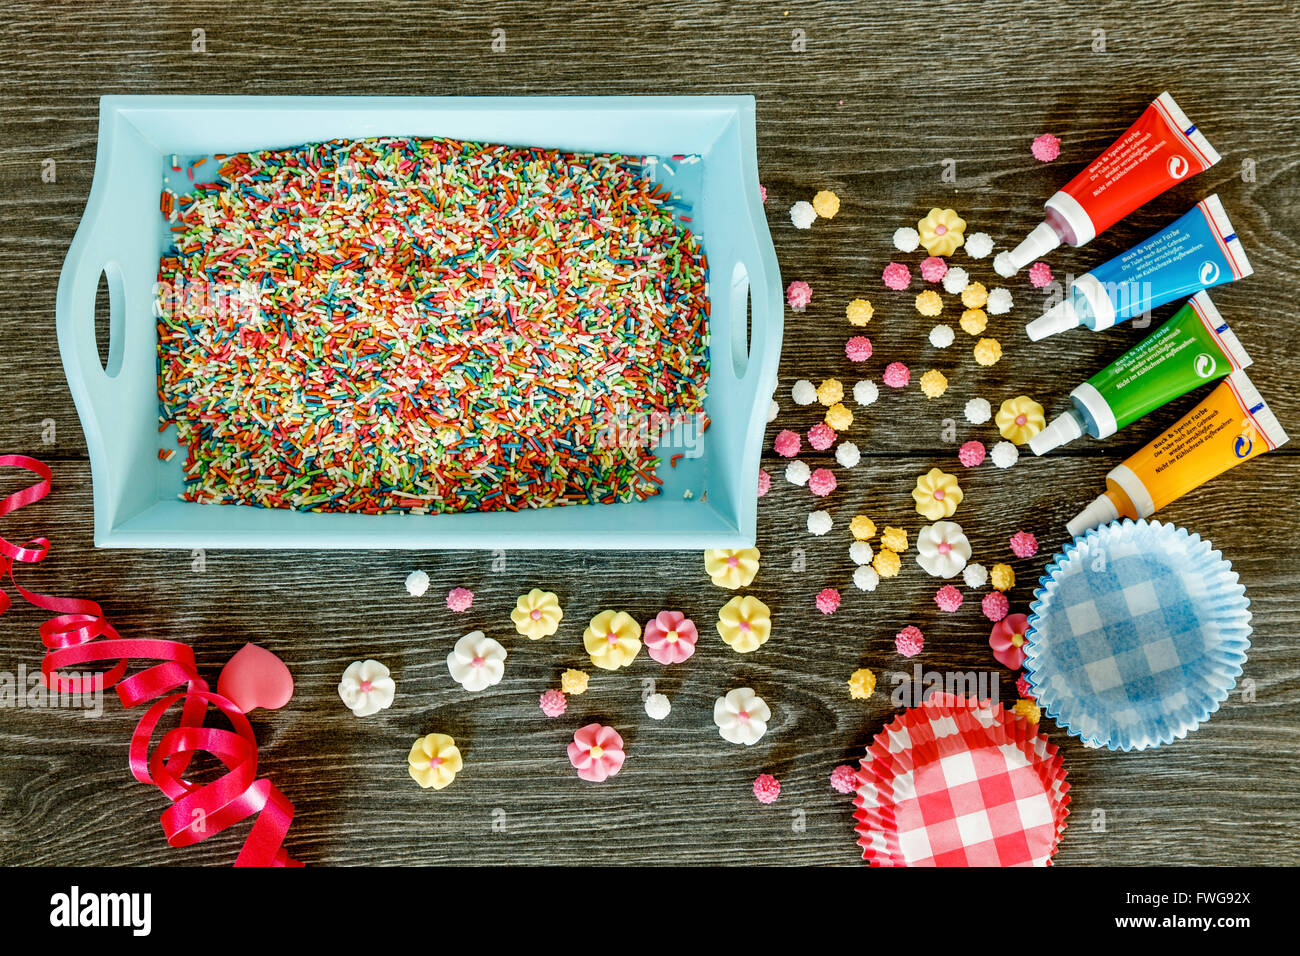 How to Decorate a Cake With Sprinkles: Easy Method